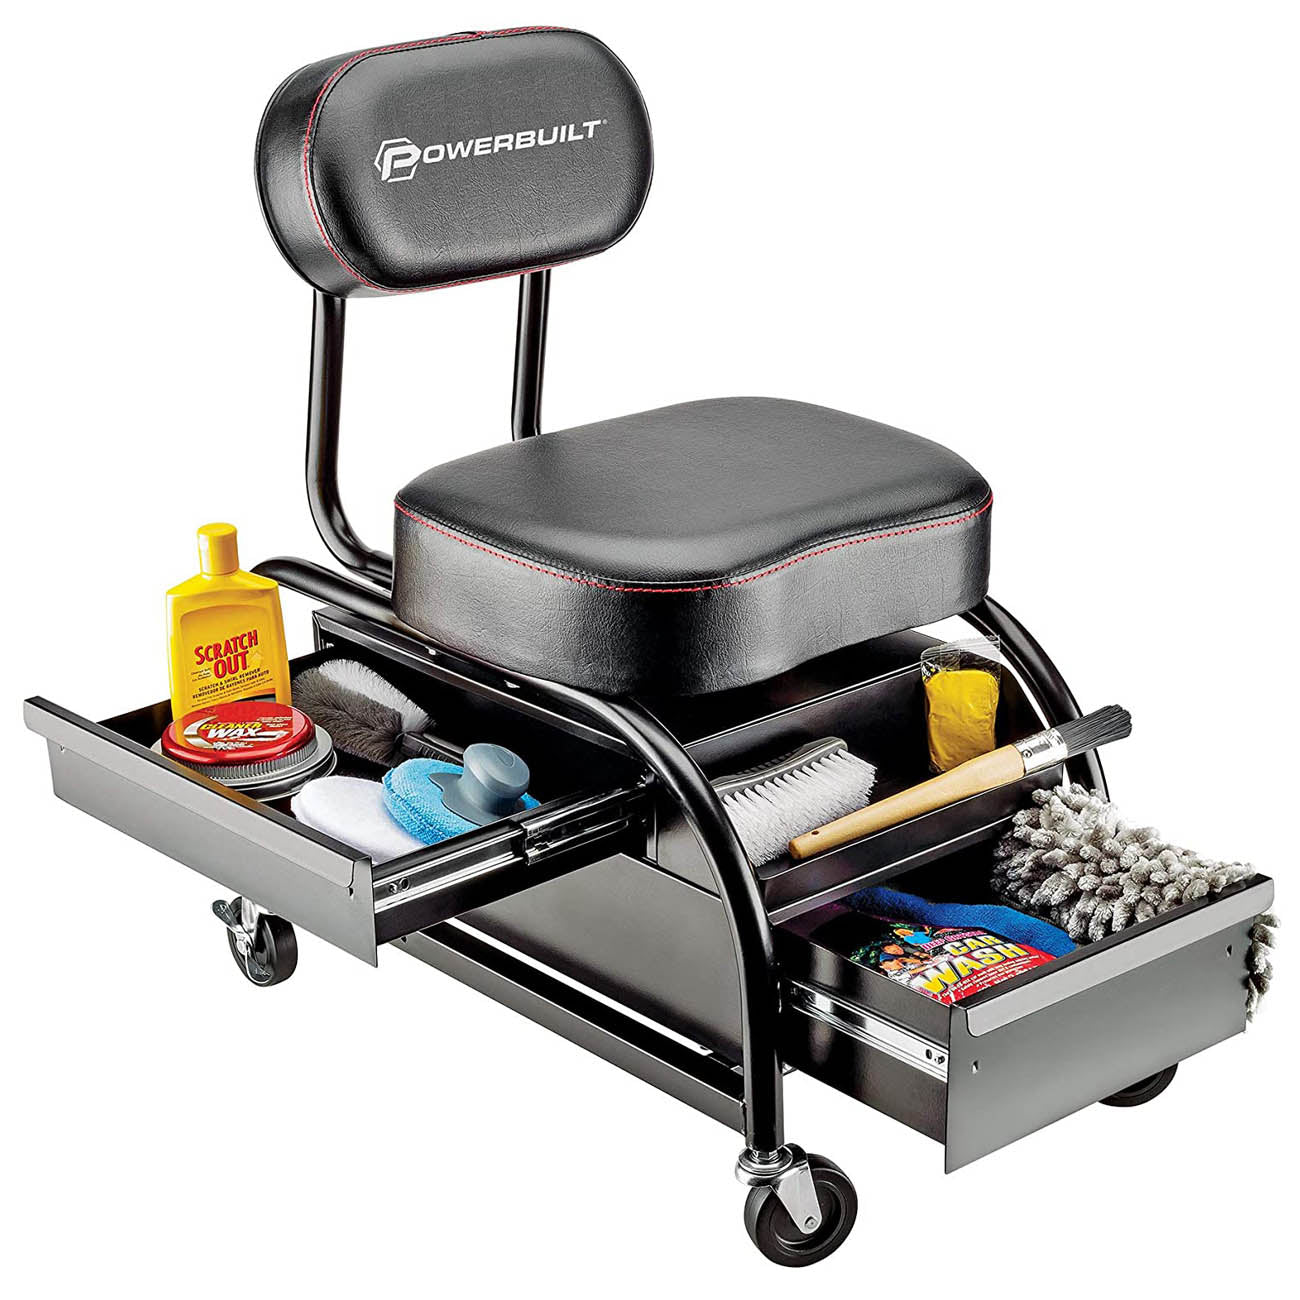 Powerbuilt Professional Detailer Roller Seat with Drawer and Tool Tray 240299